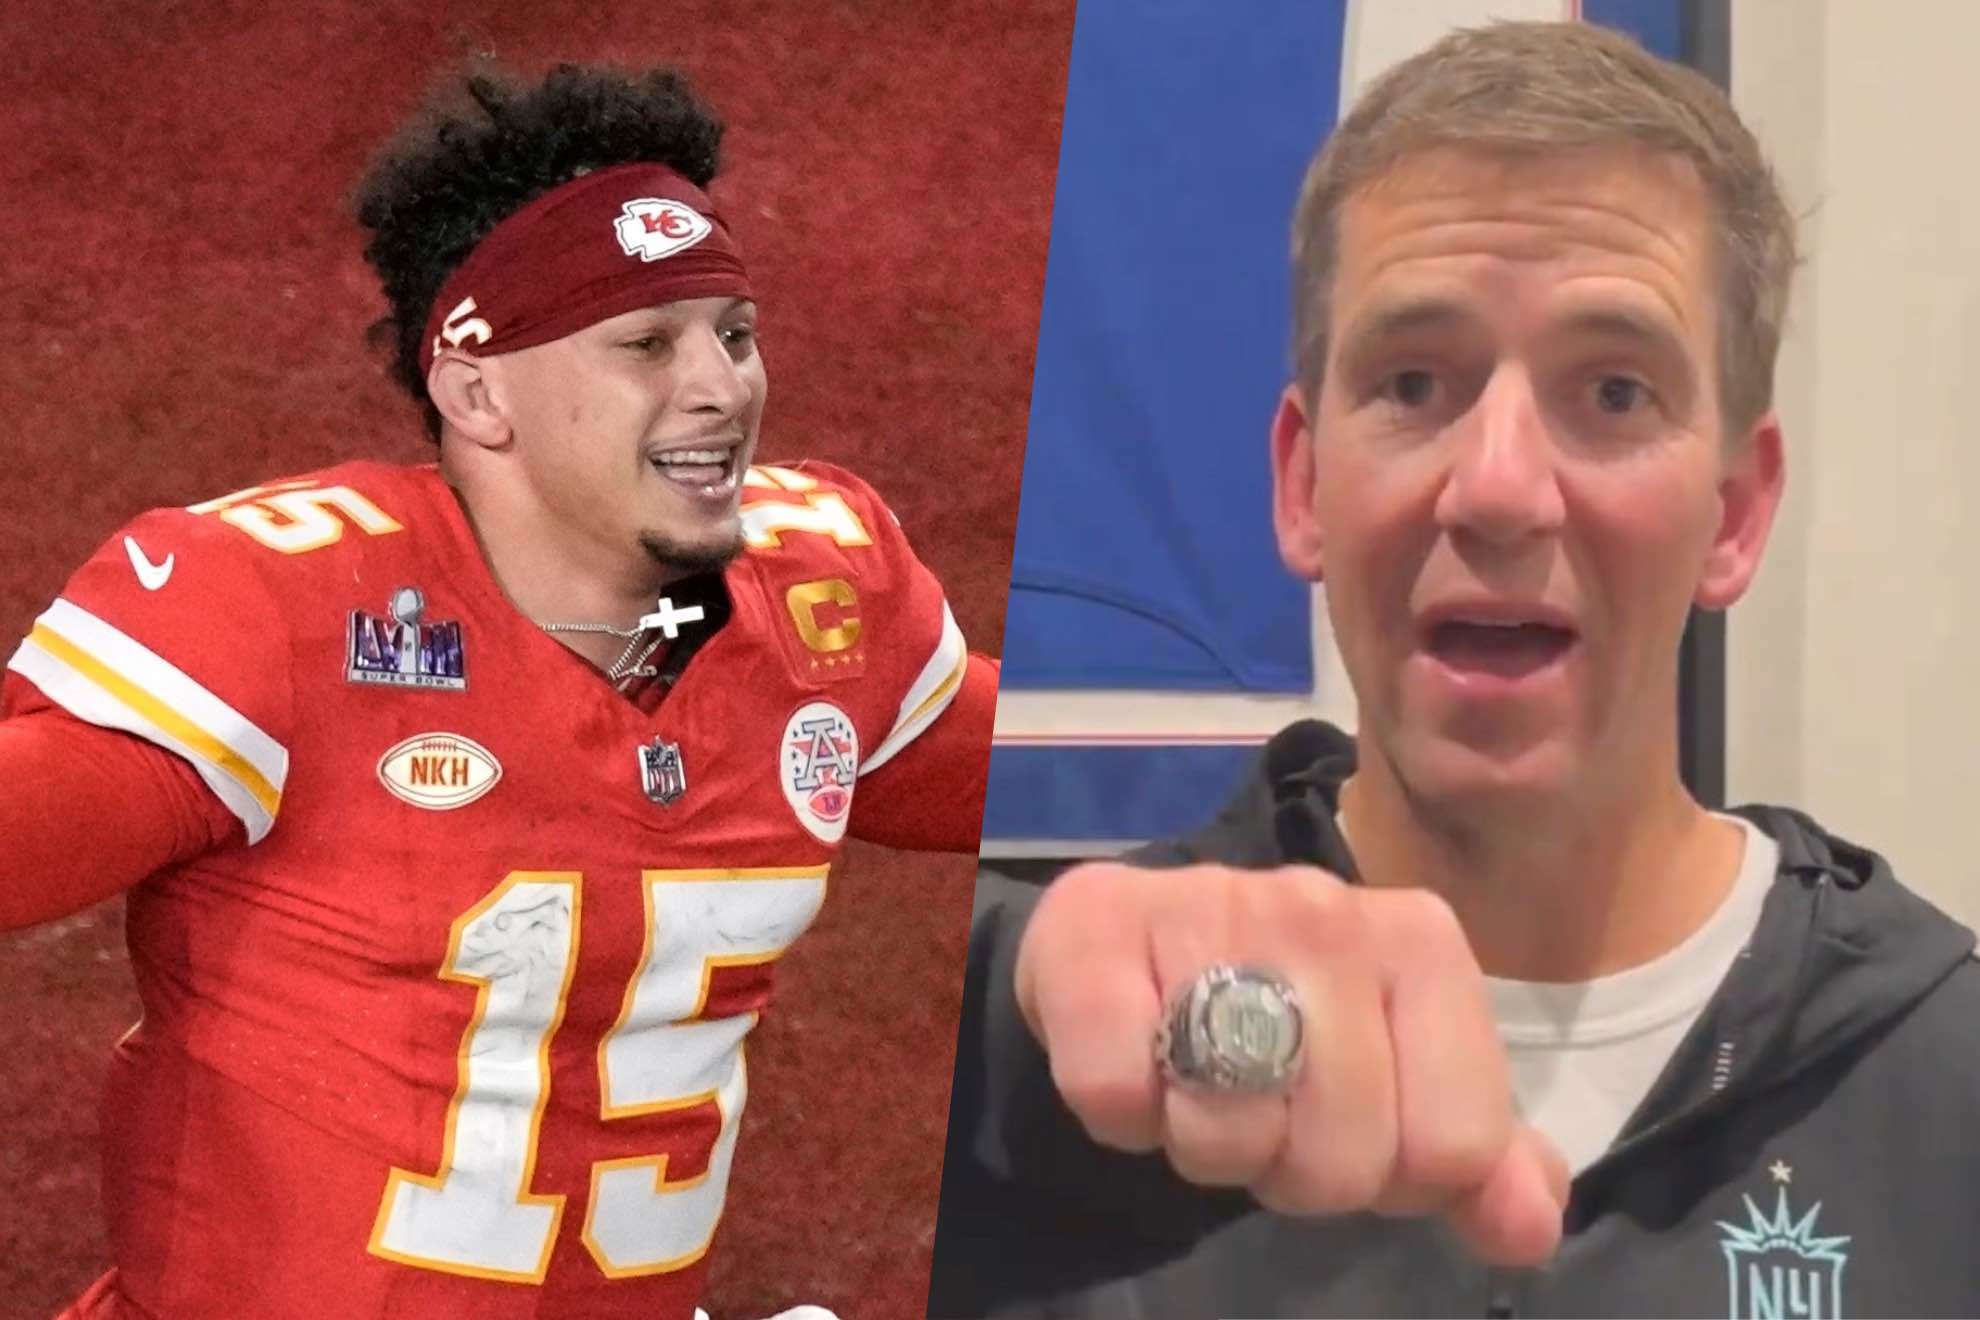 Eli Manning and Patrick Mahomes got into it over their ring collections